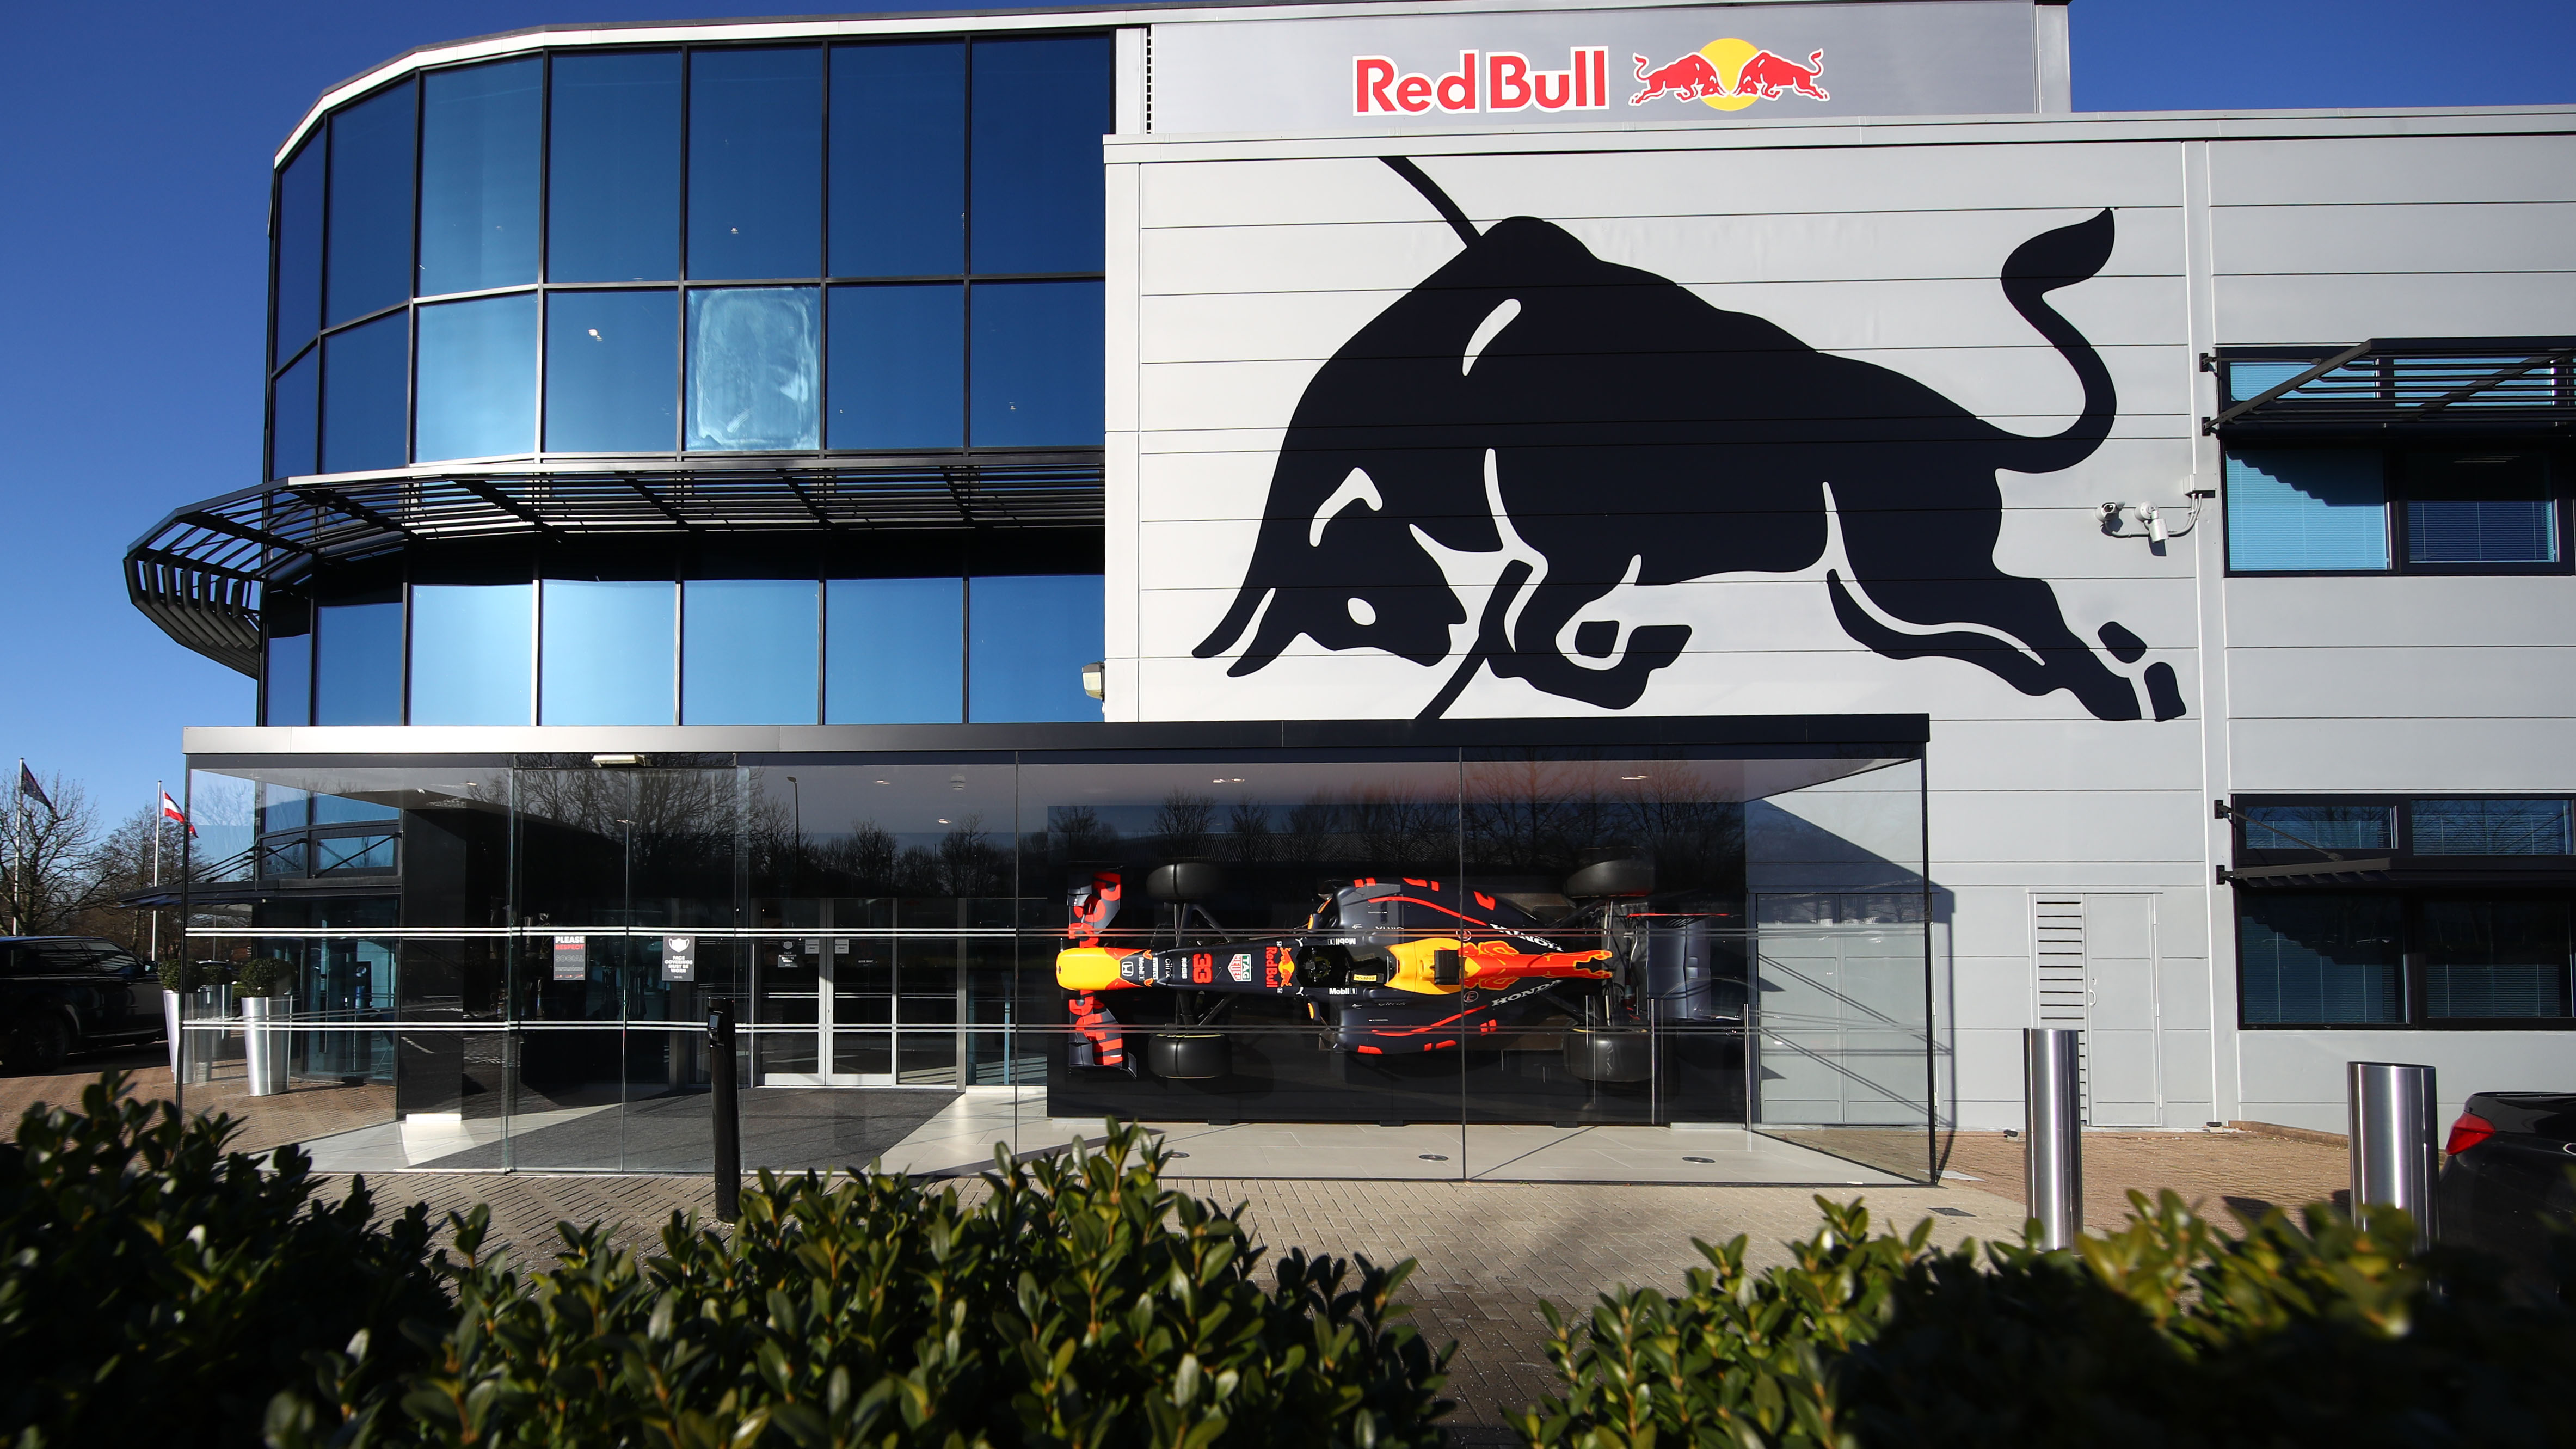 A general view of the Red Bull F1 Racing team headquarters in Milton Keynes, United Kingdom.